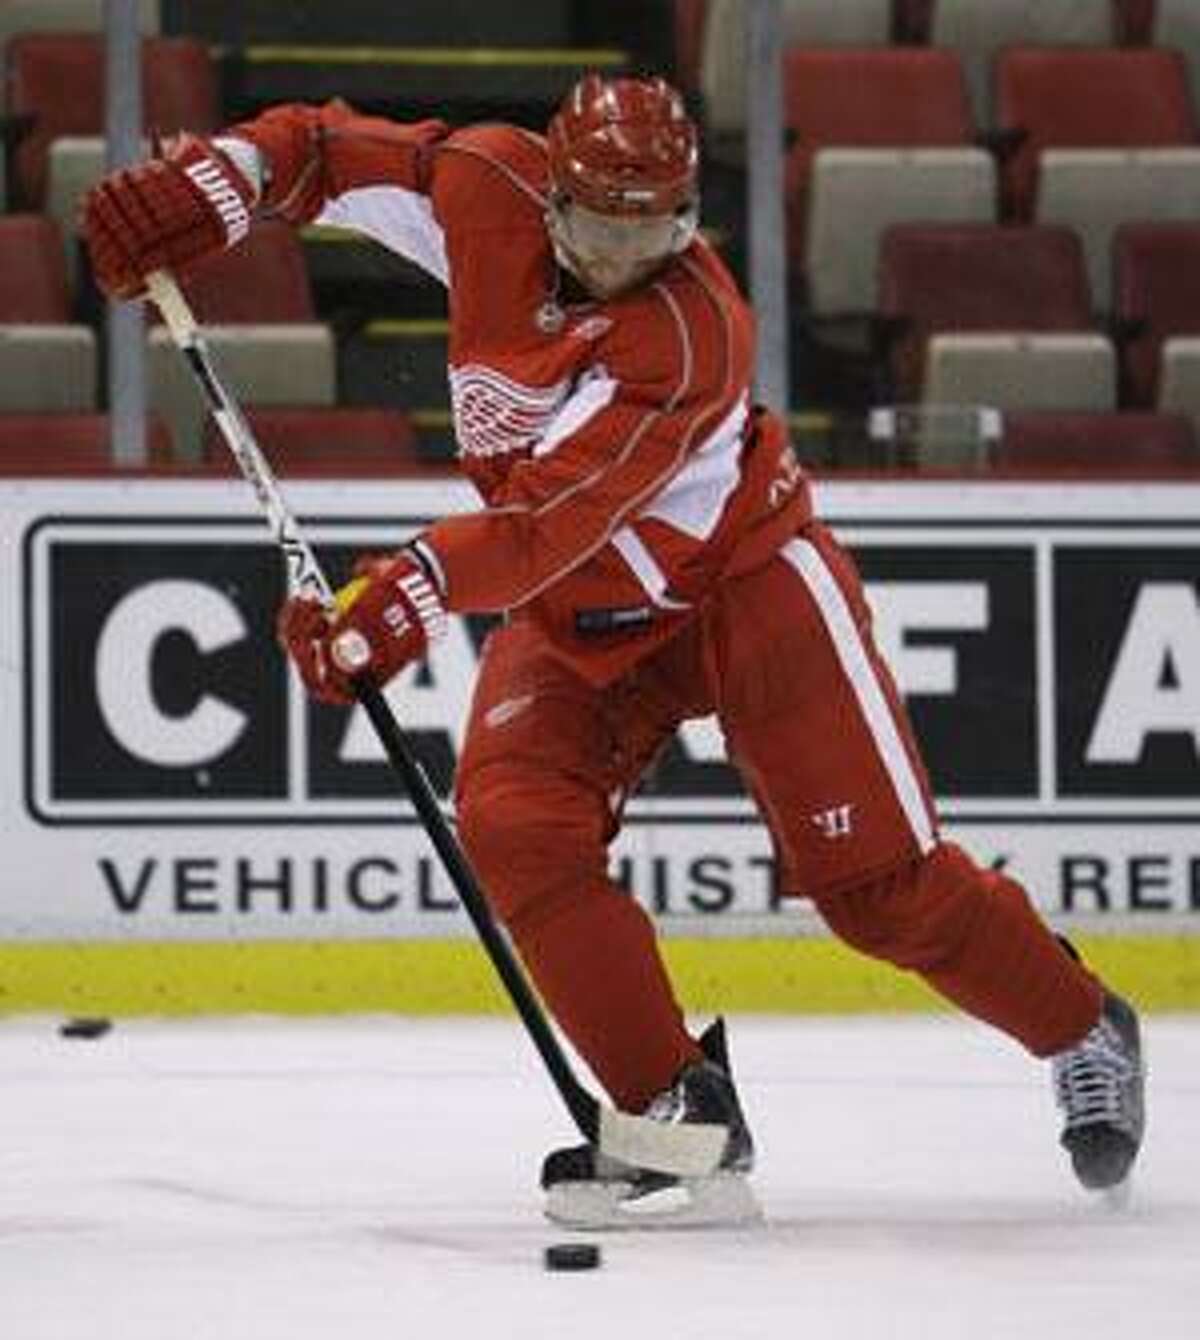 Detroit Red Wings forward Marian Hossa moves the puck during practice in Detroit Friday. Game 1 of the Stanley Cup Finals on Saturday will match the Red Wings against the Pittsburgh Penguins. (AP Photo/Paul Sancya)